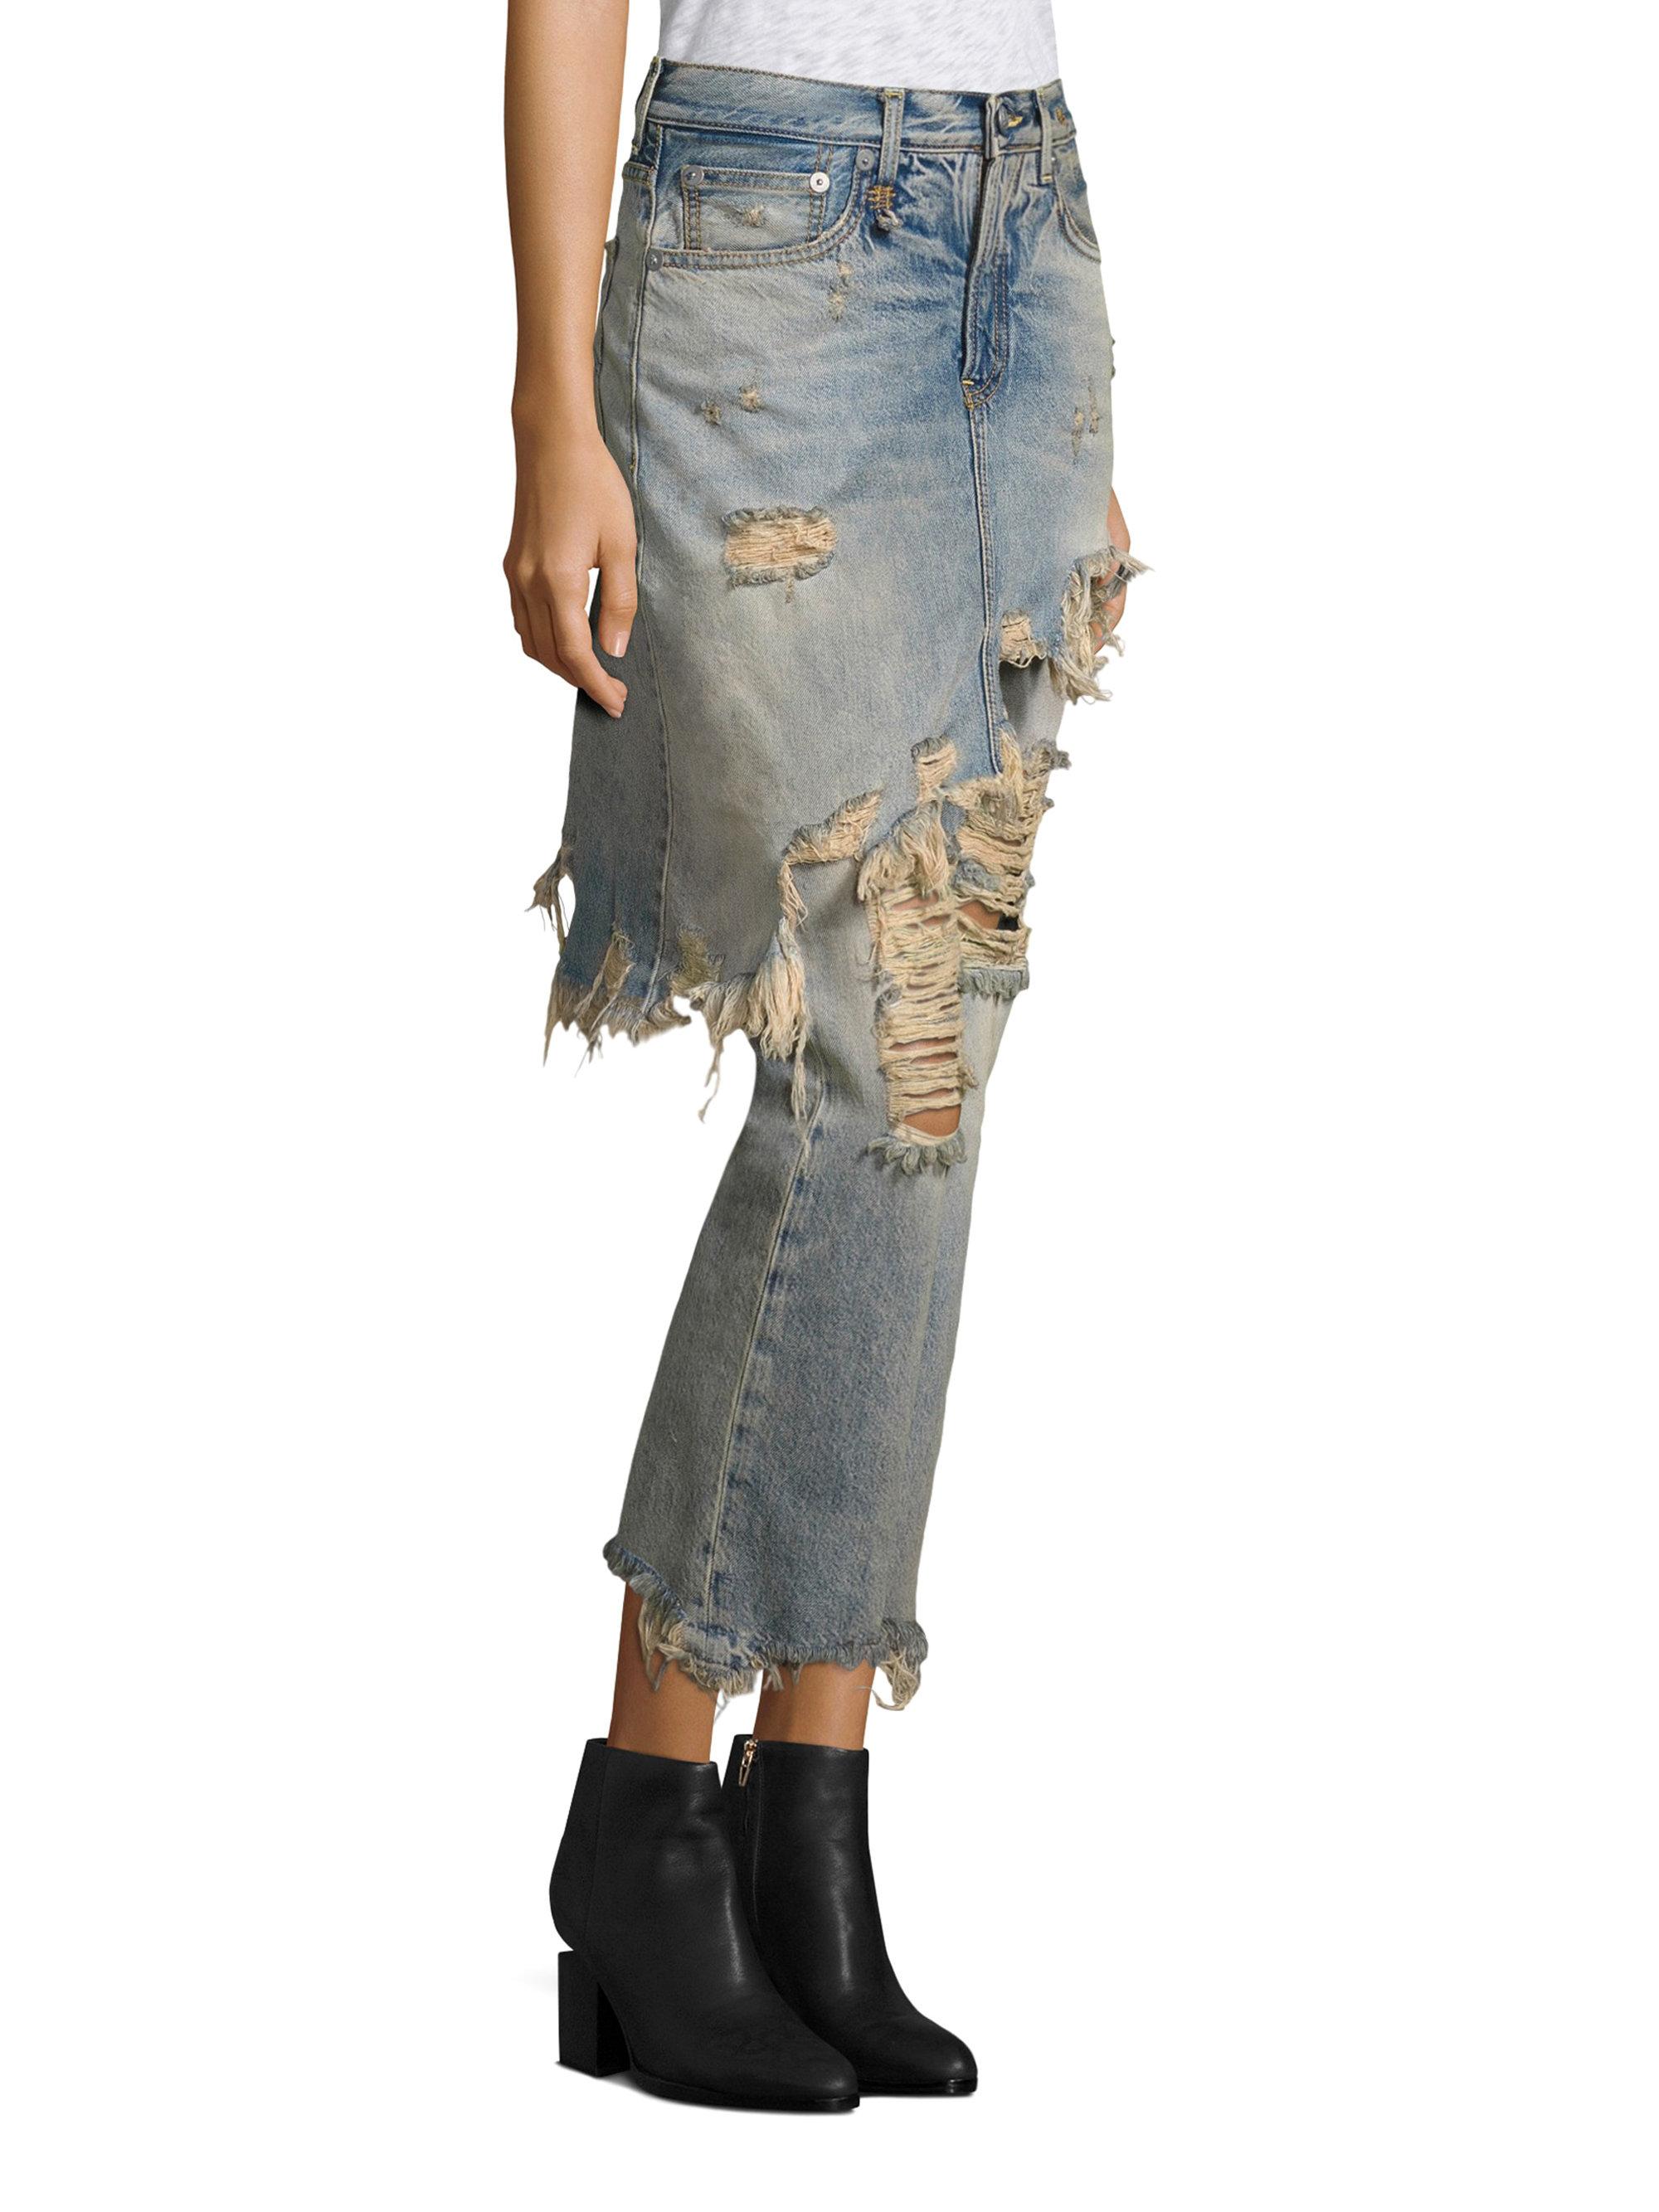 jeans with skirt overlay